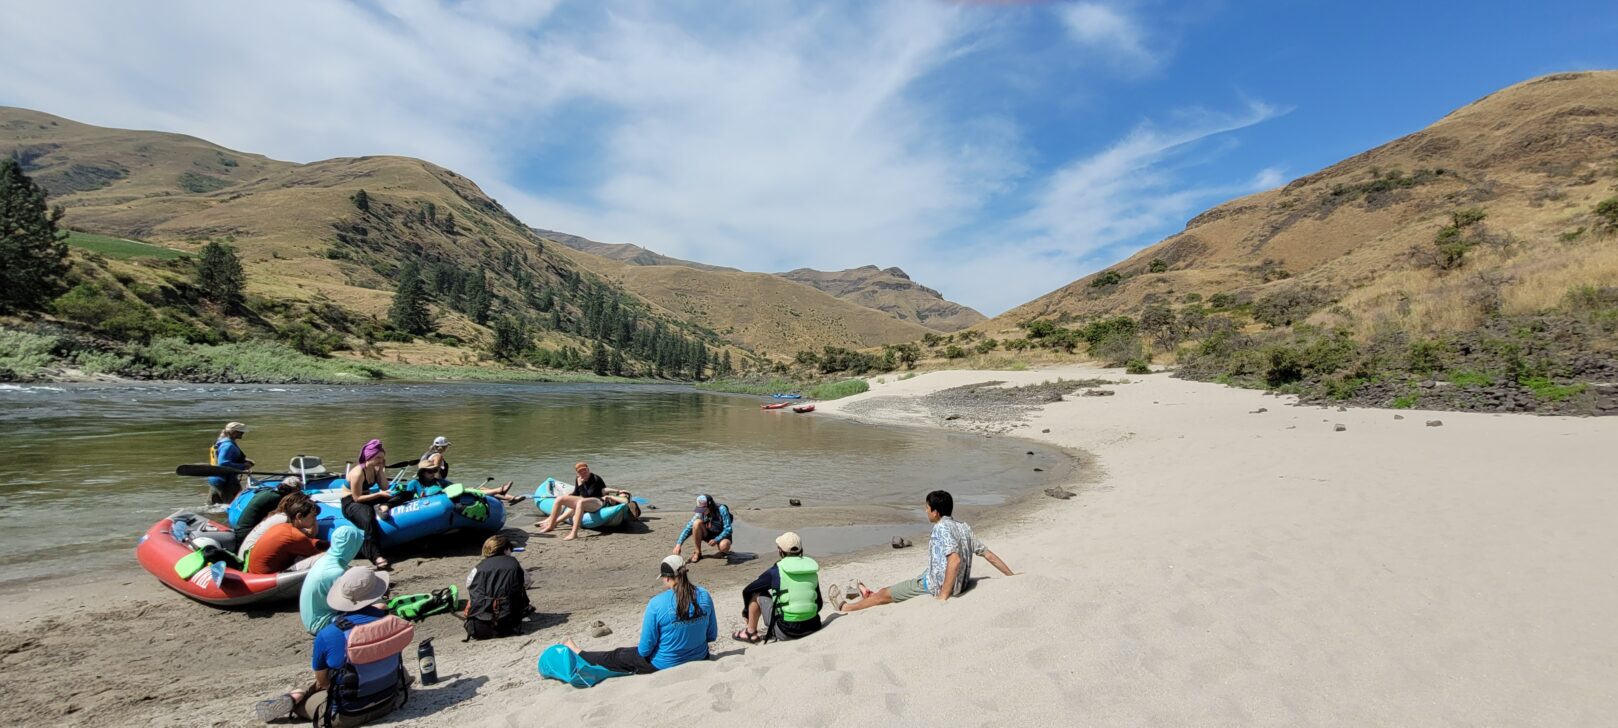 students resting on the shores of a river while rafting